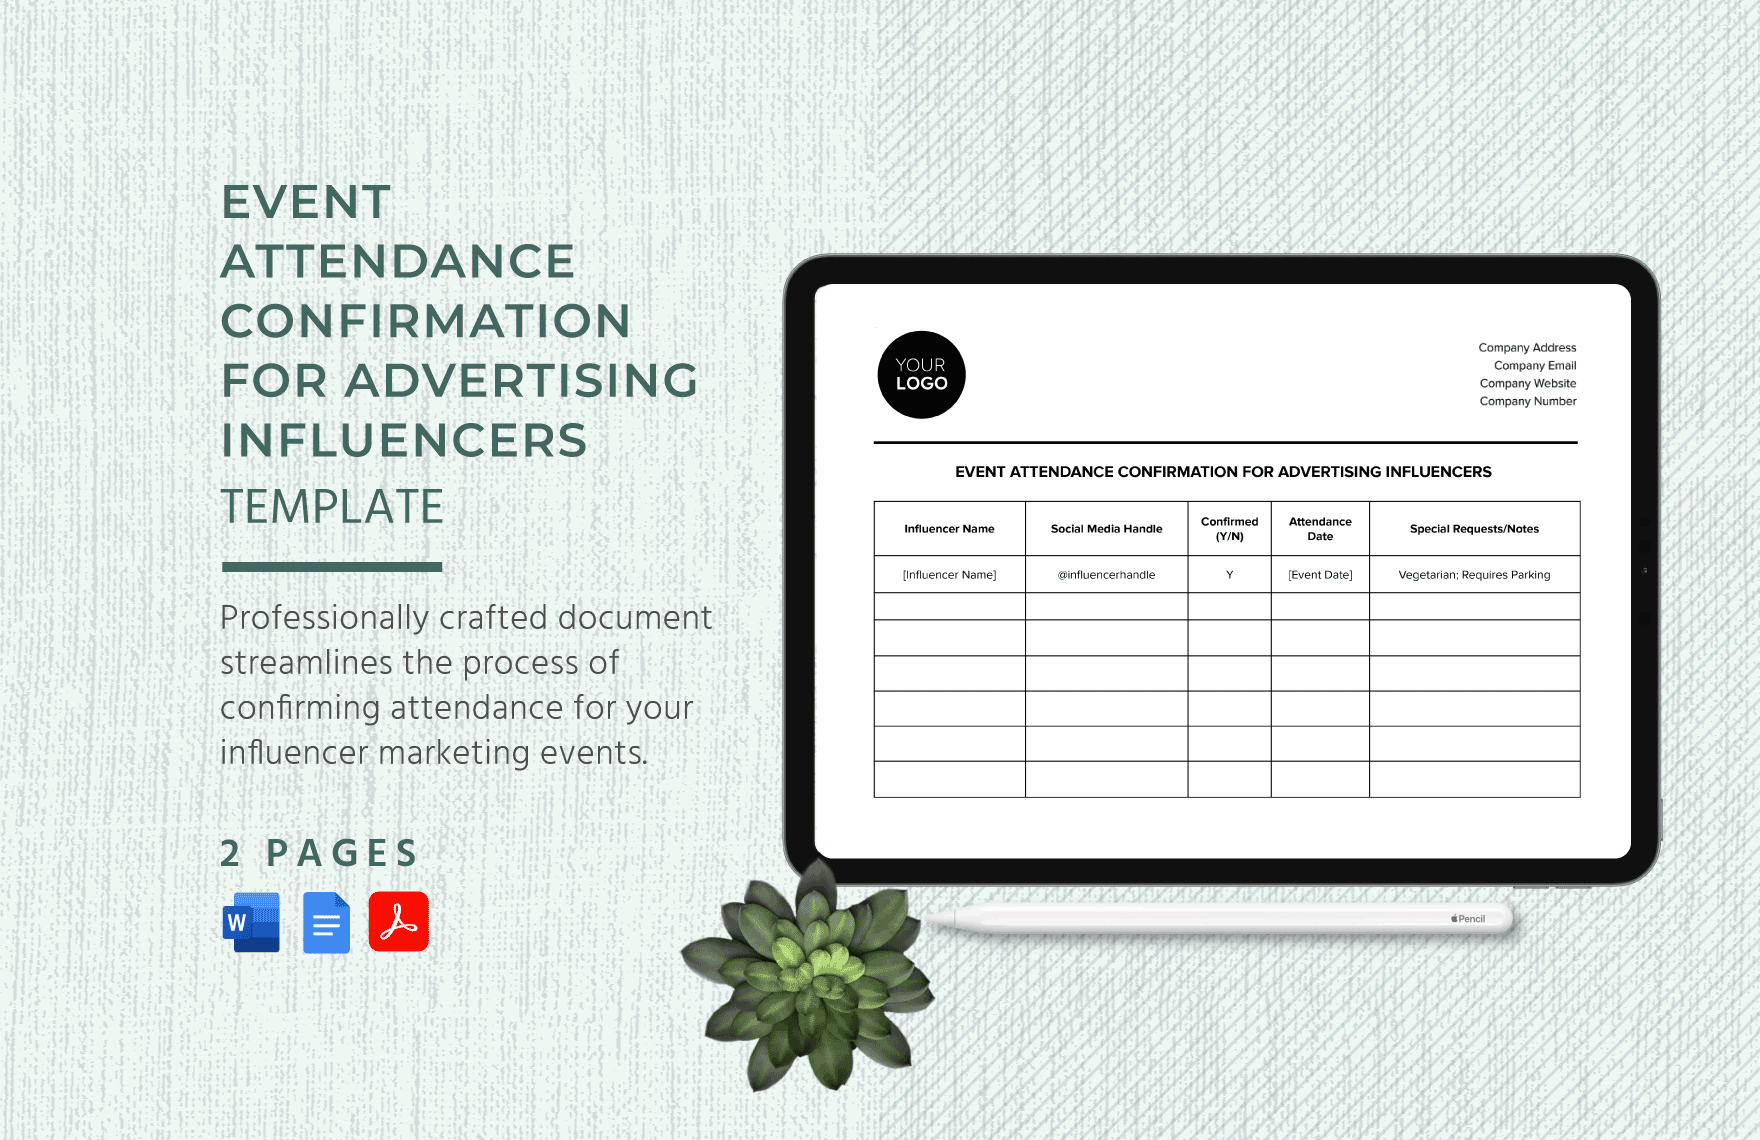 Event Attendance Confirmation for Advertising Influencers Template